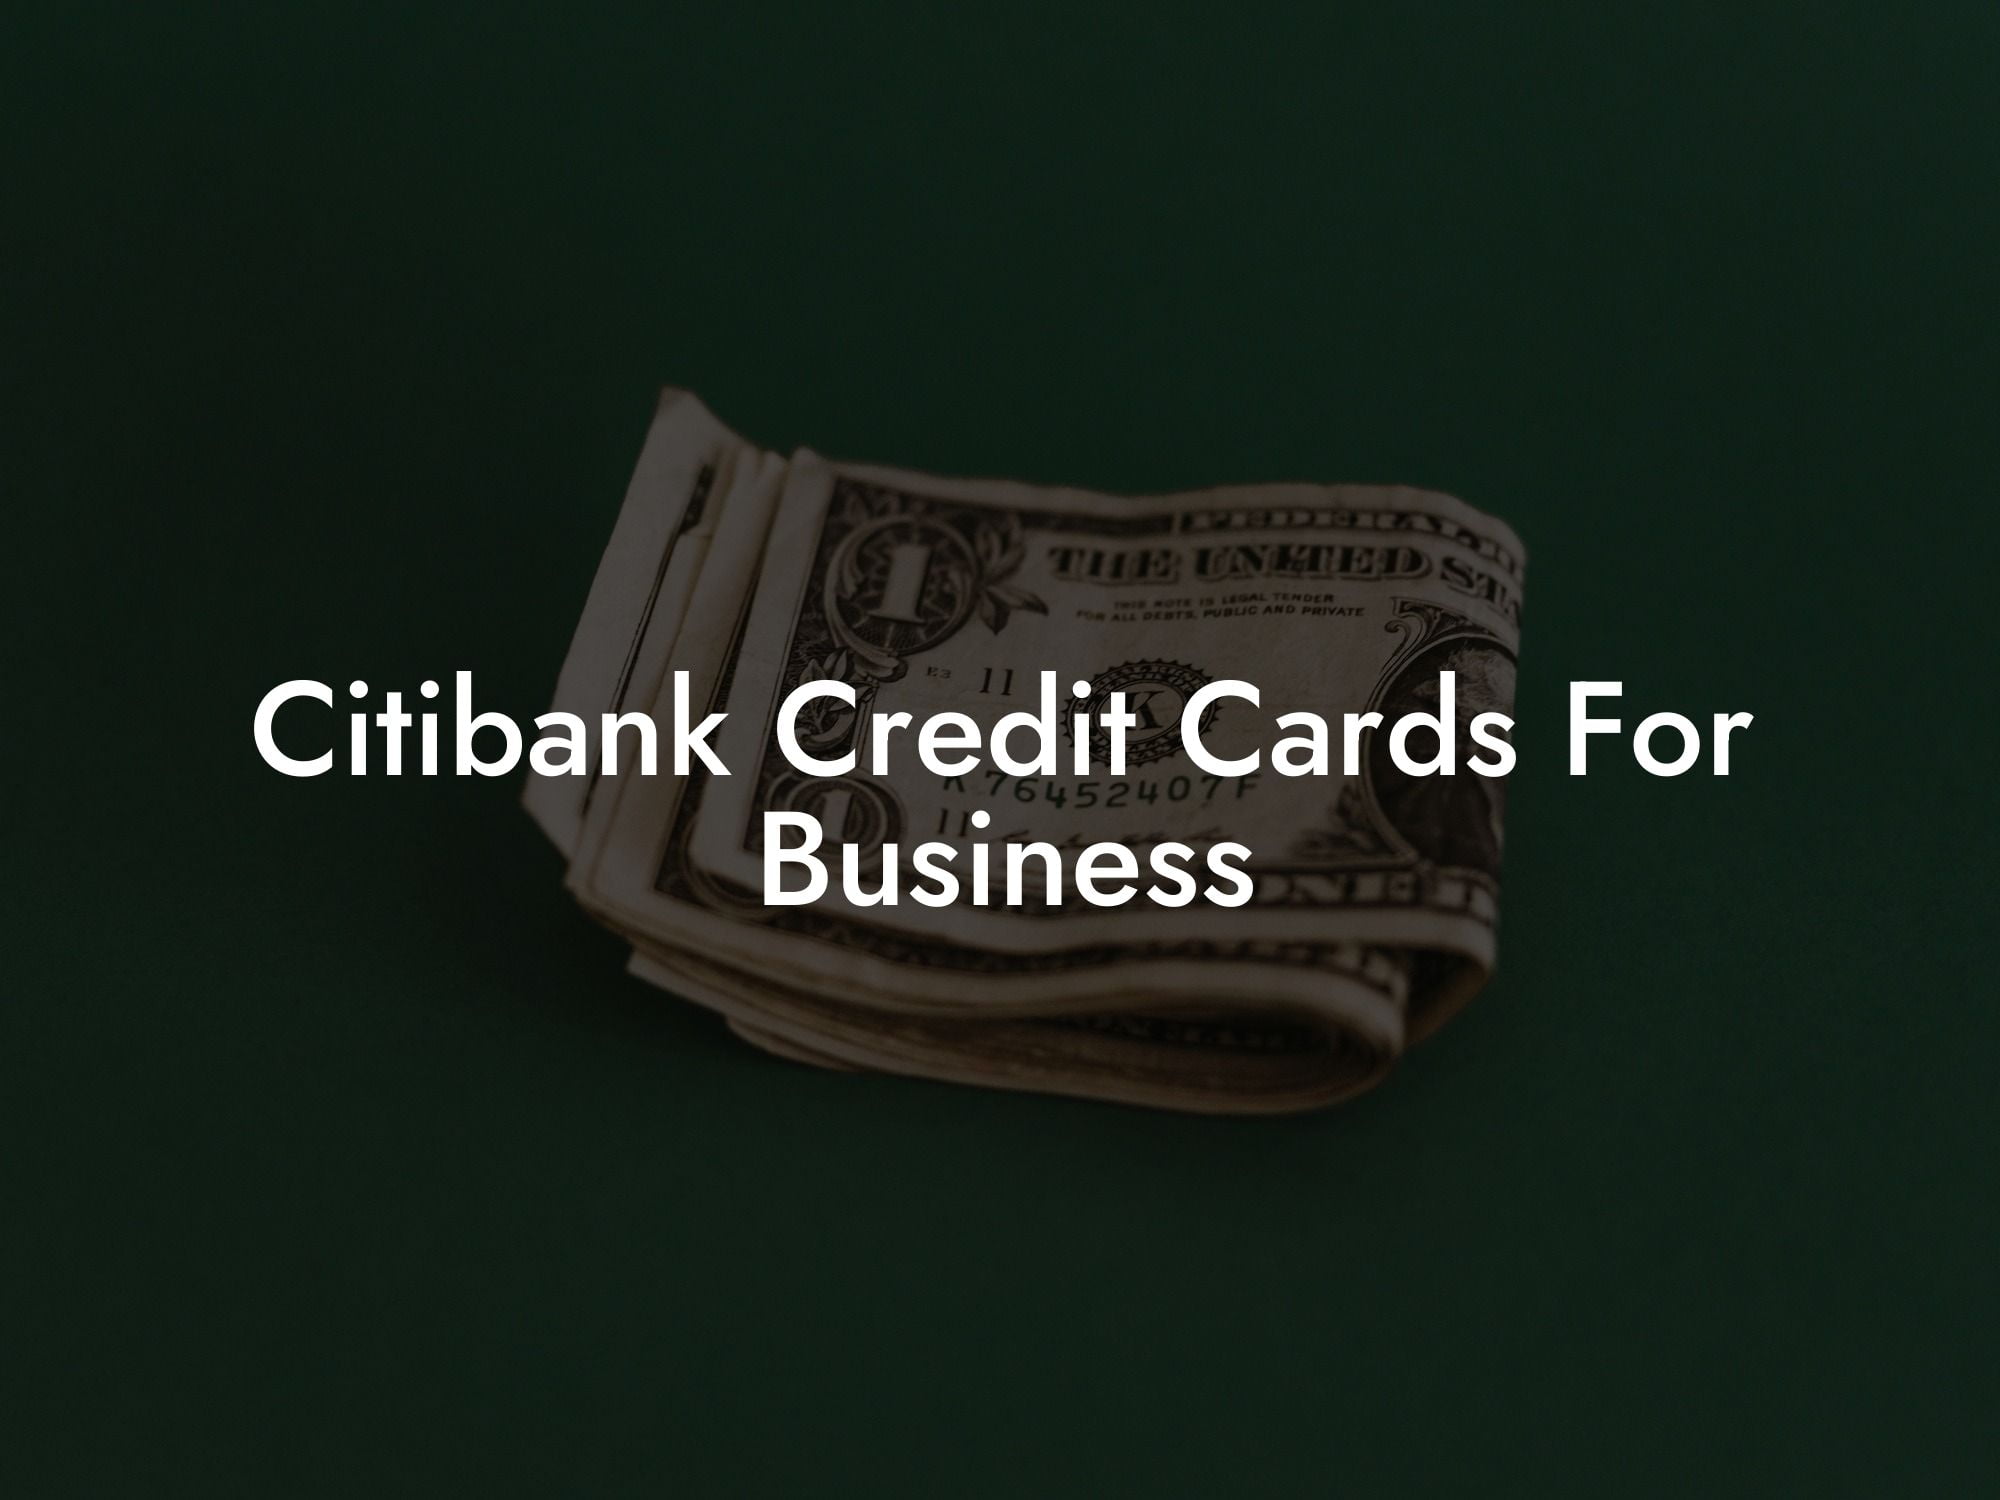 Citibank Credit Cards For Business